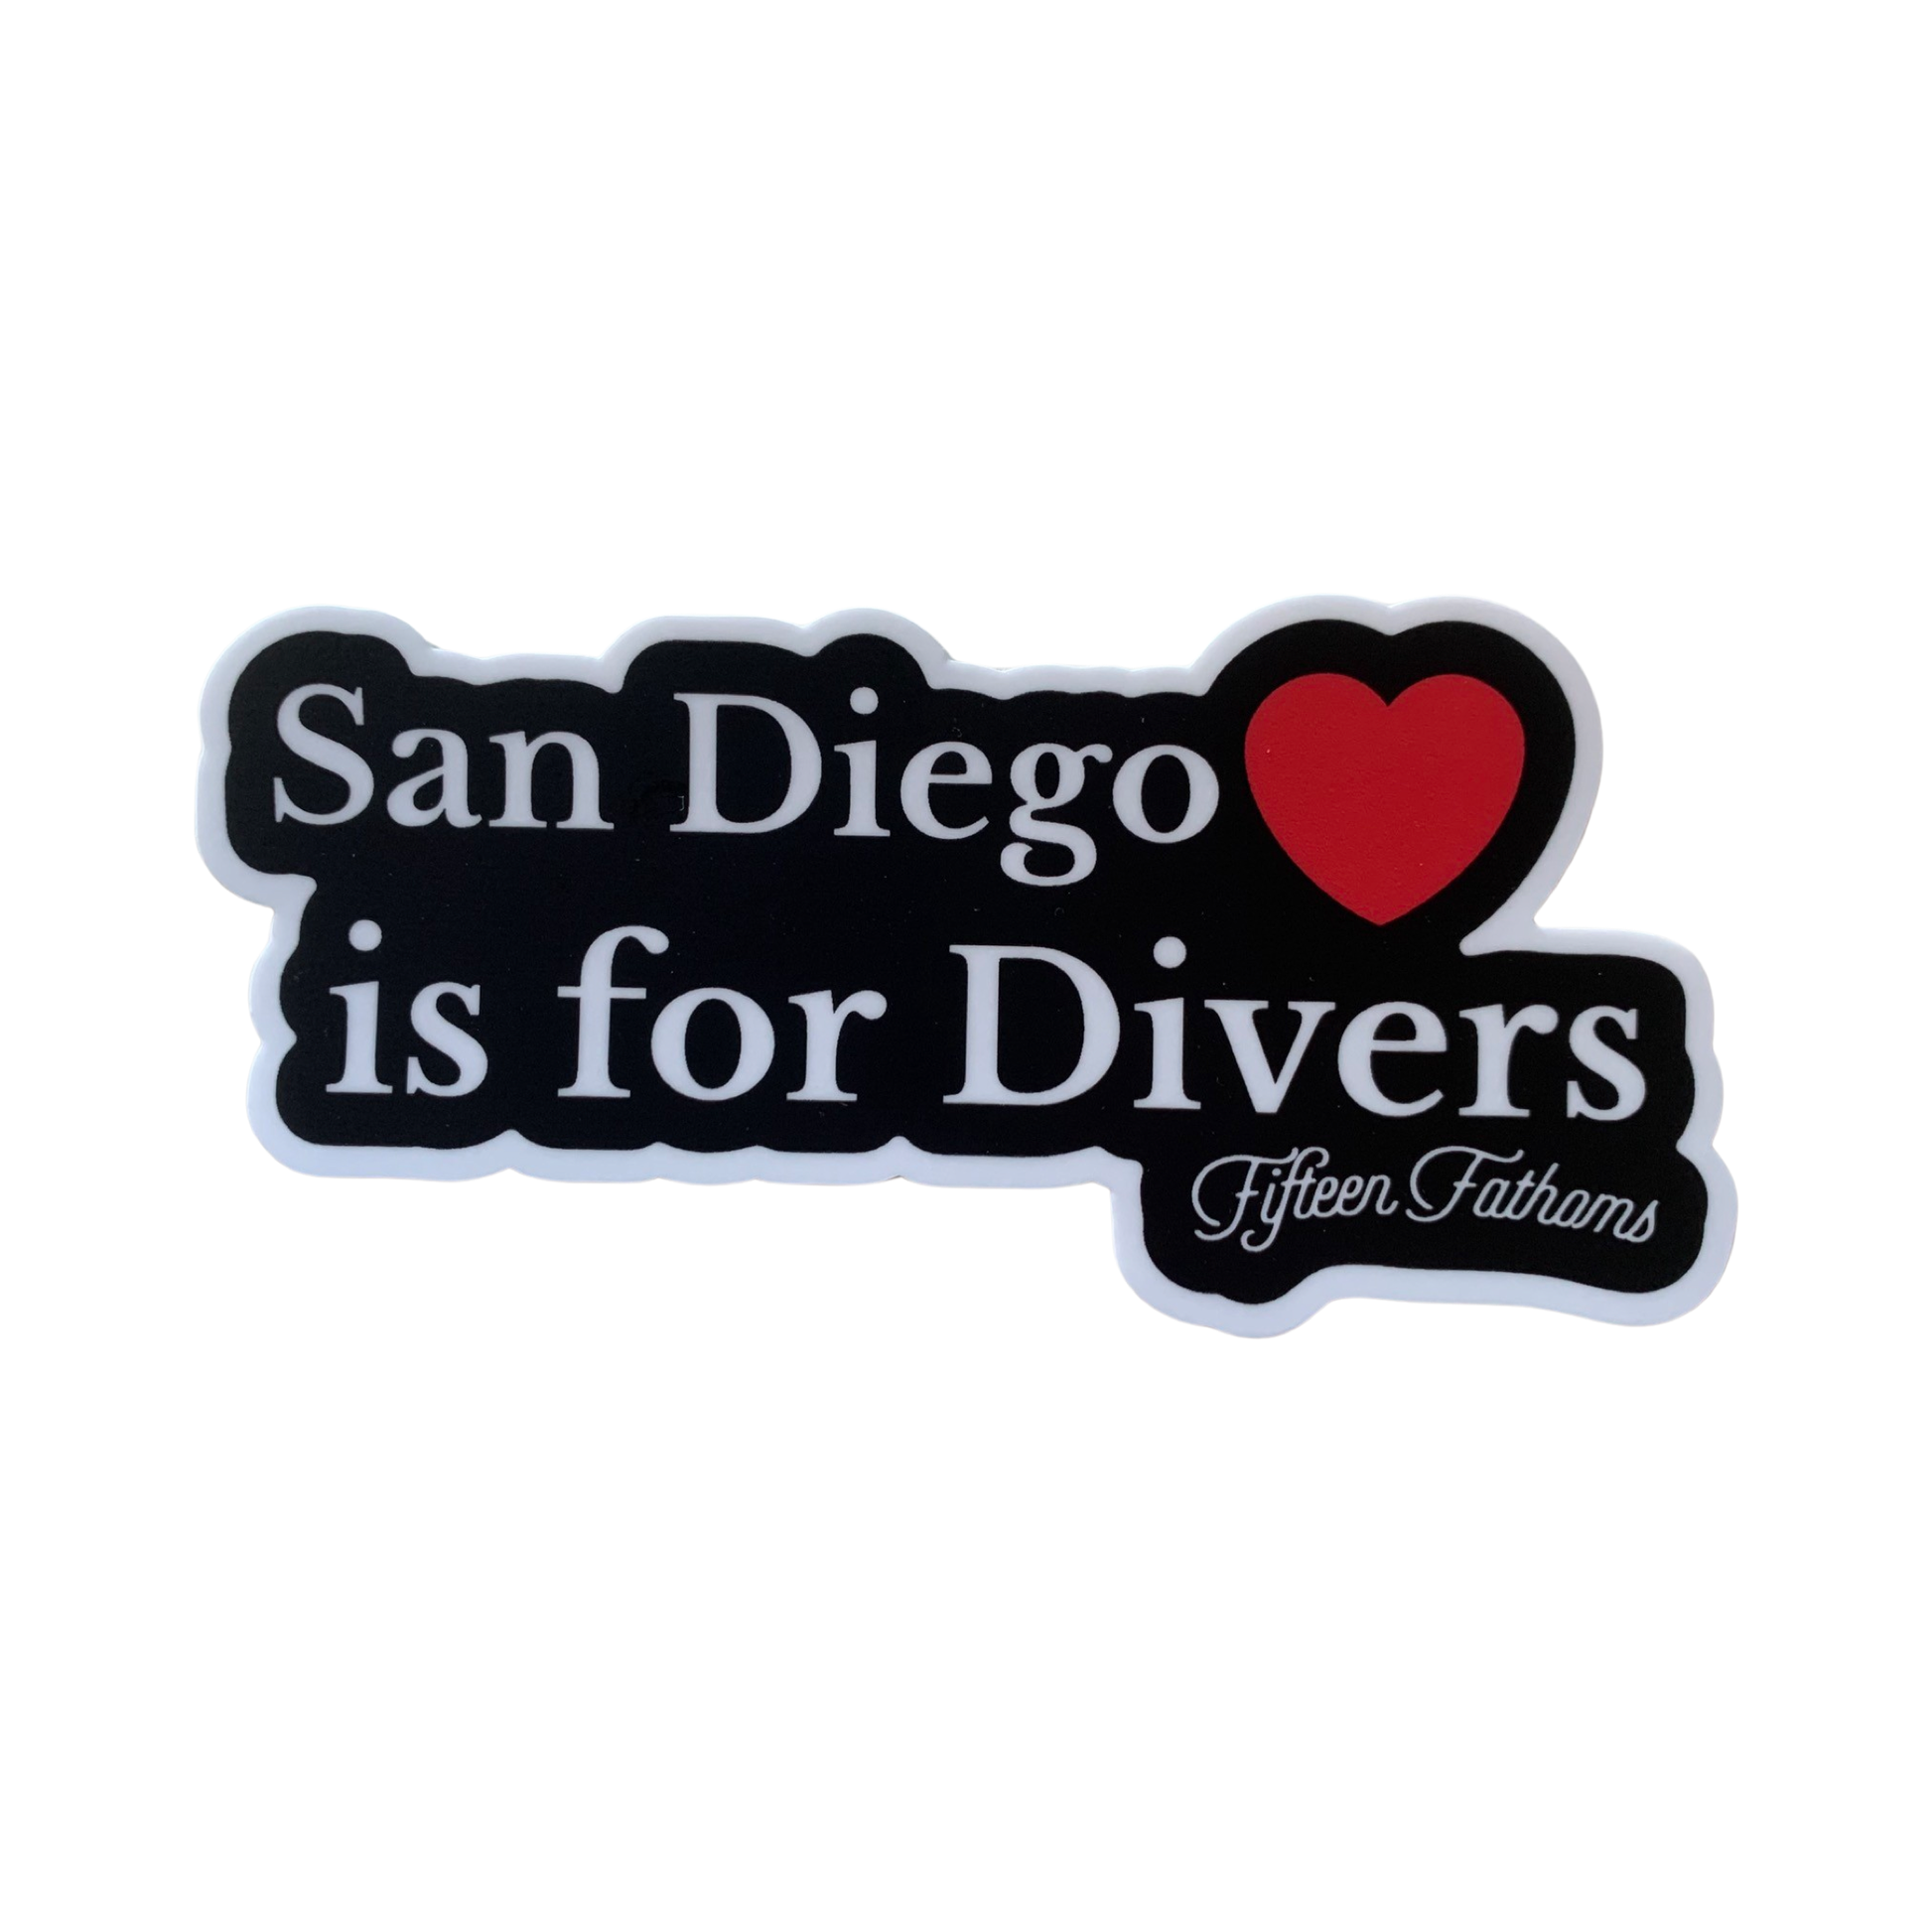 Inspired by the classic "Virginia is for lovers" slogan, this new sticker is for all of our San Diego divers.  Show your love for America's Finest City, and the home of 15 Fathoms.    Length: 5 inches  Height: 2.5 inches